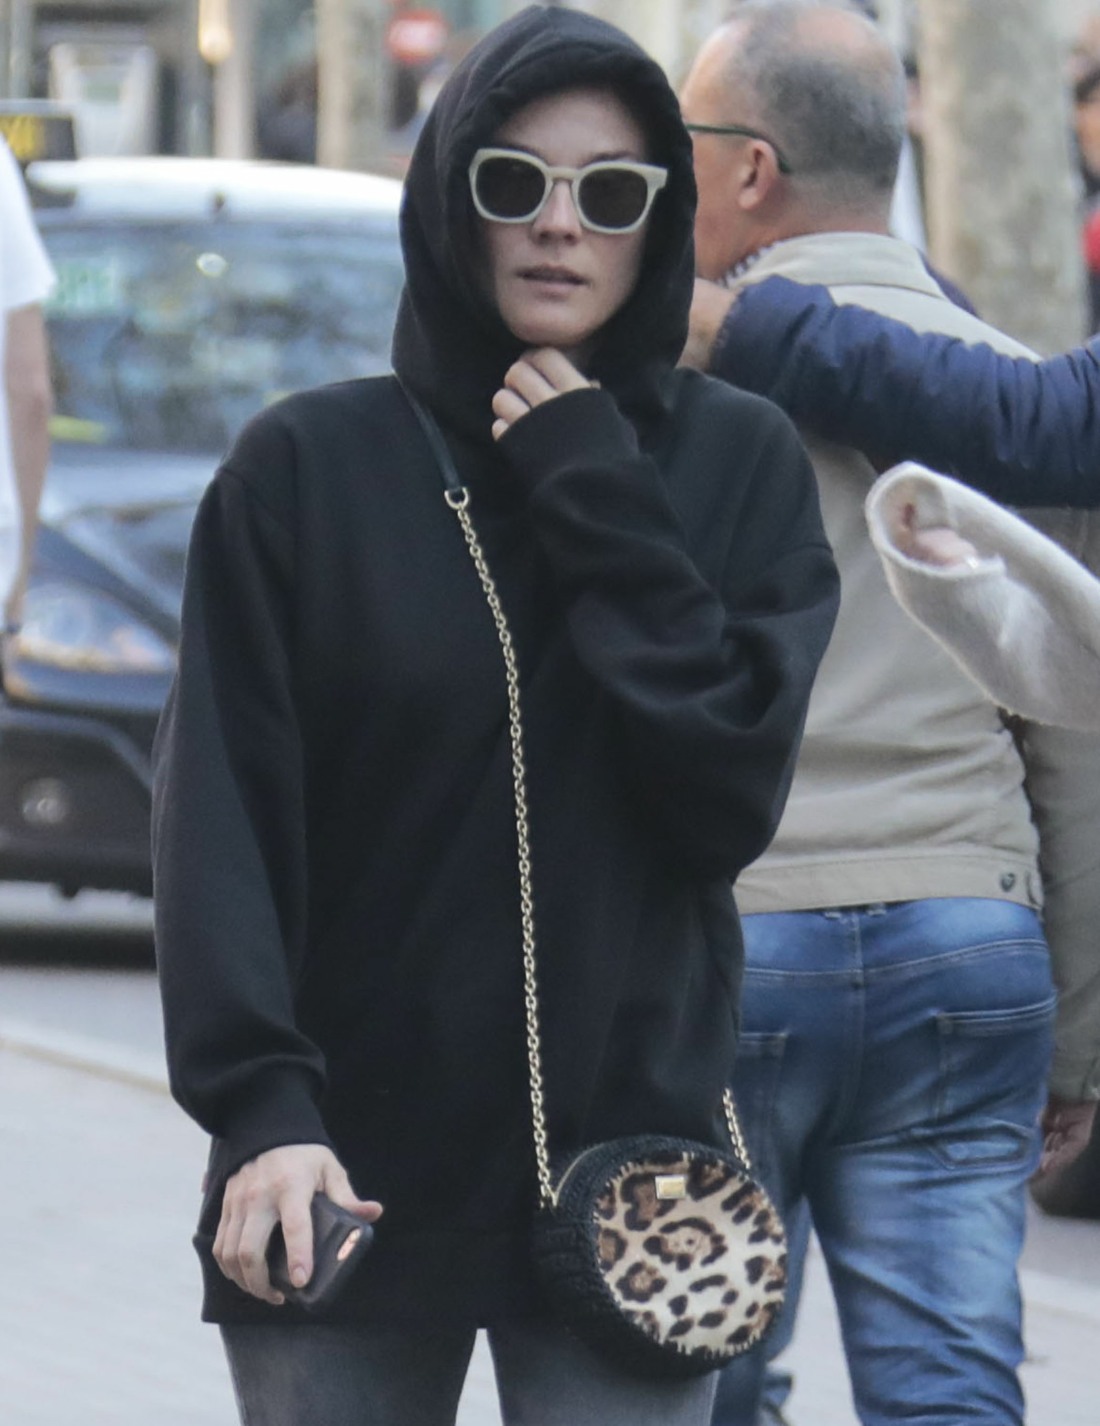 Diane Kruger Out In Barcelona While Norma Reedus Does His Promotion